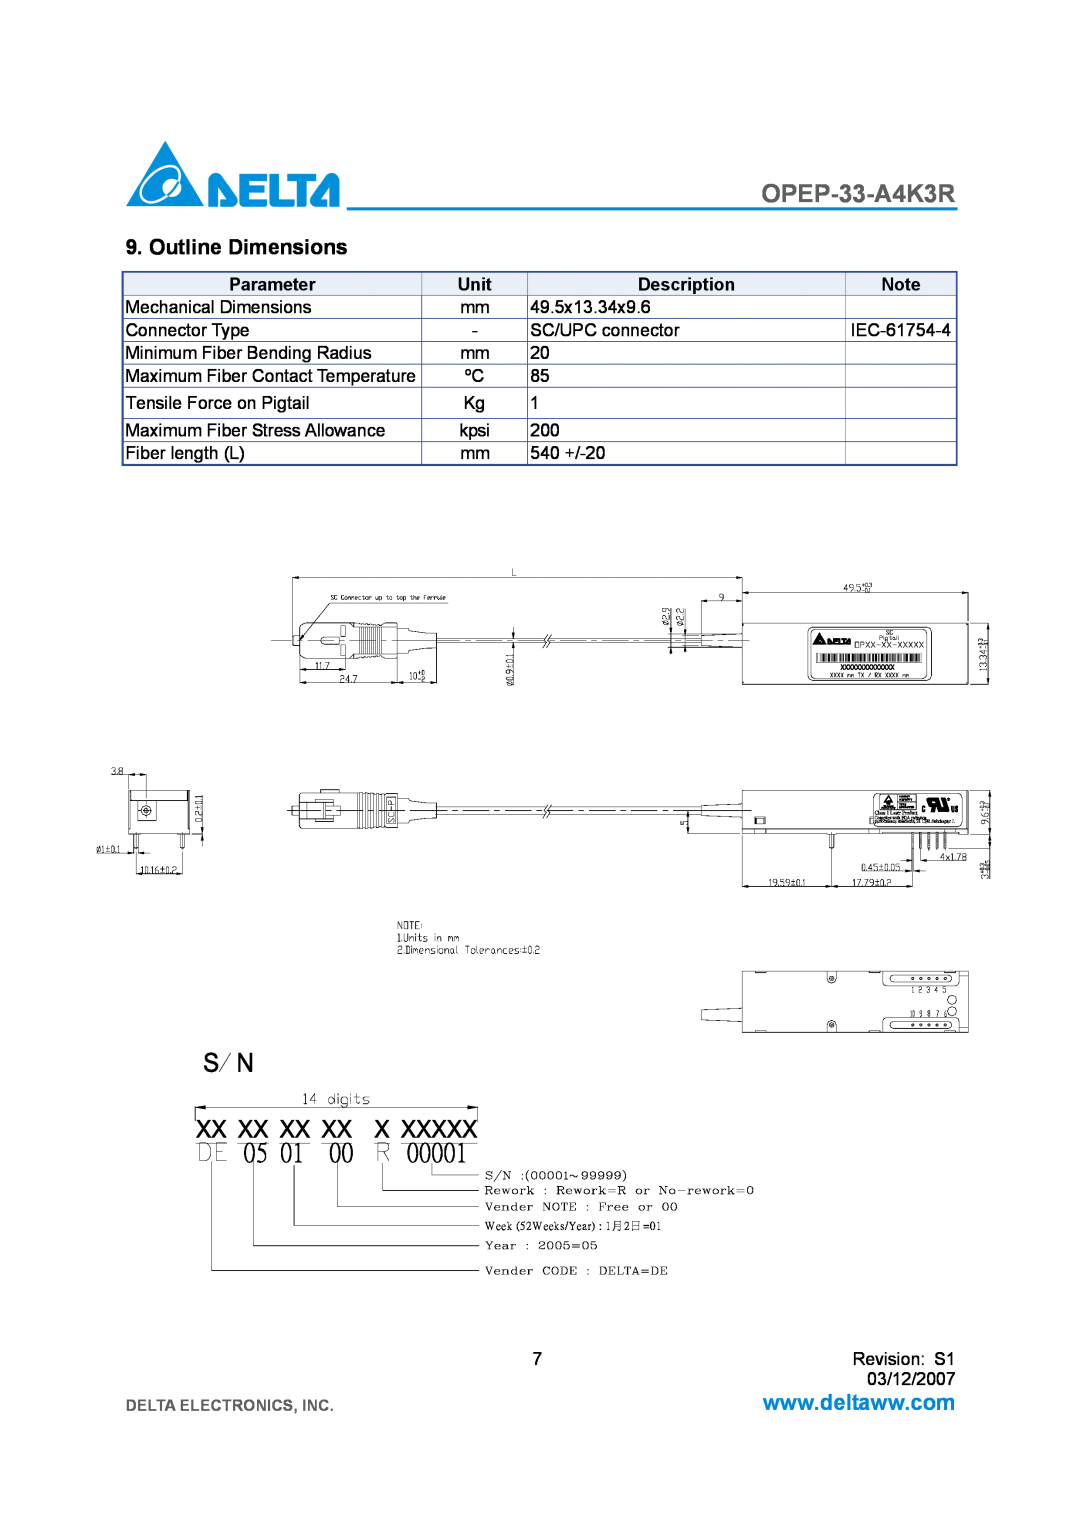 Delta Electronics OPEP-33-A4K3R manual Outline Dimensions, kpsi 